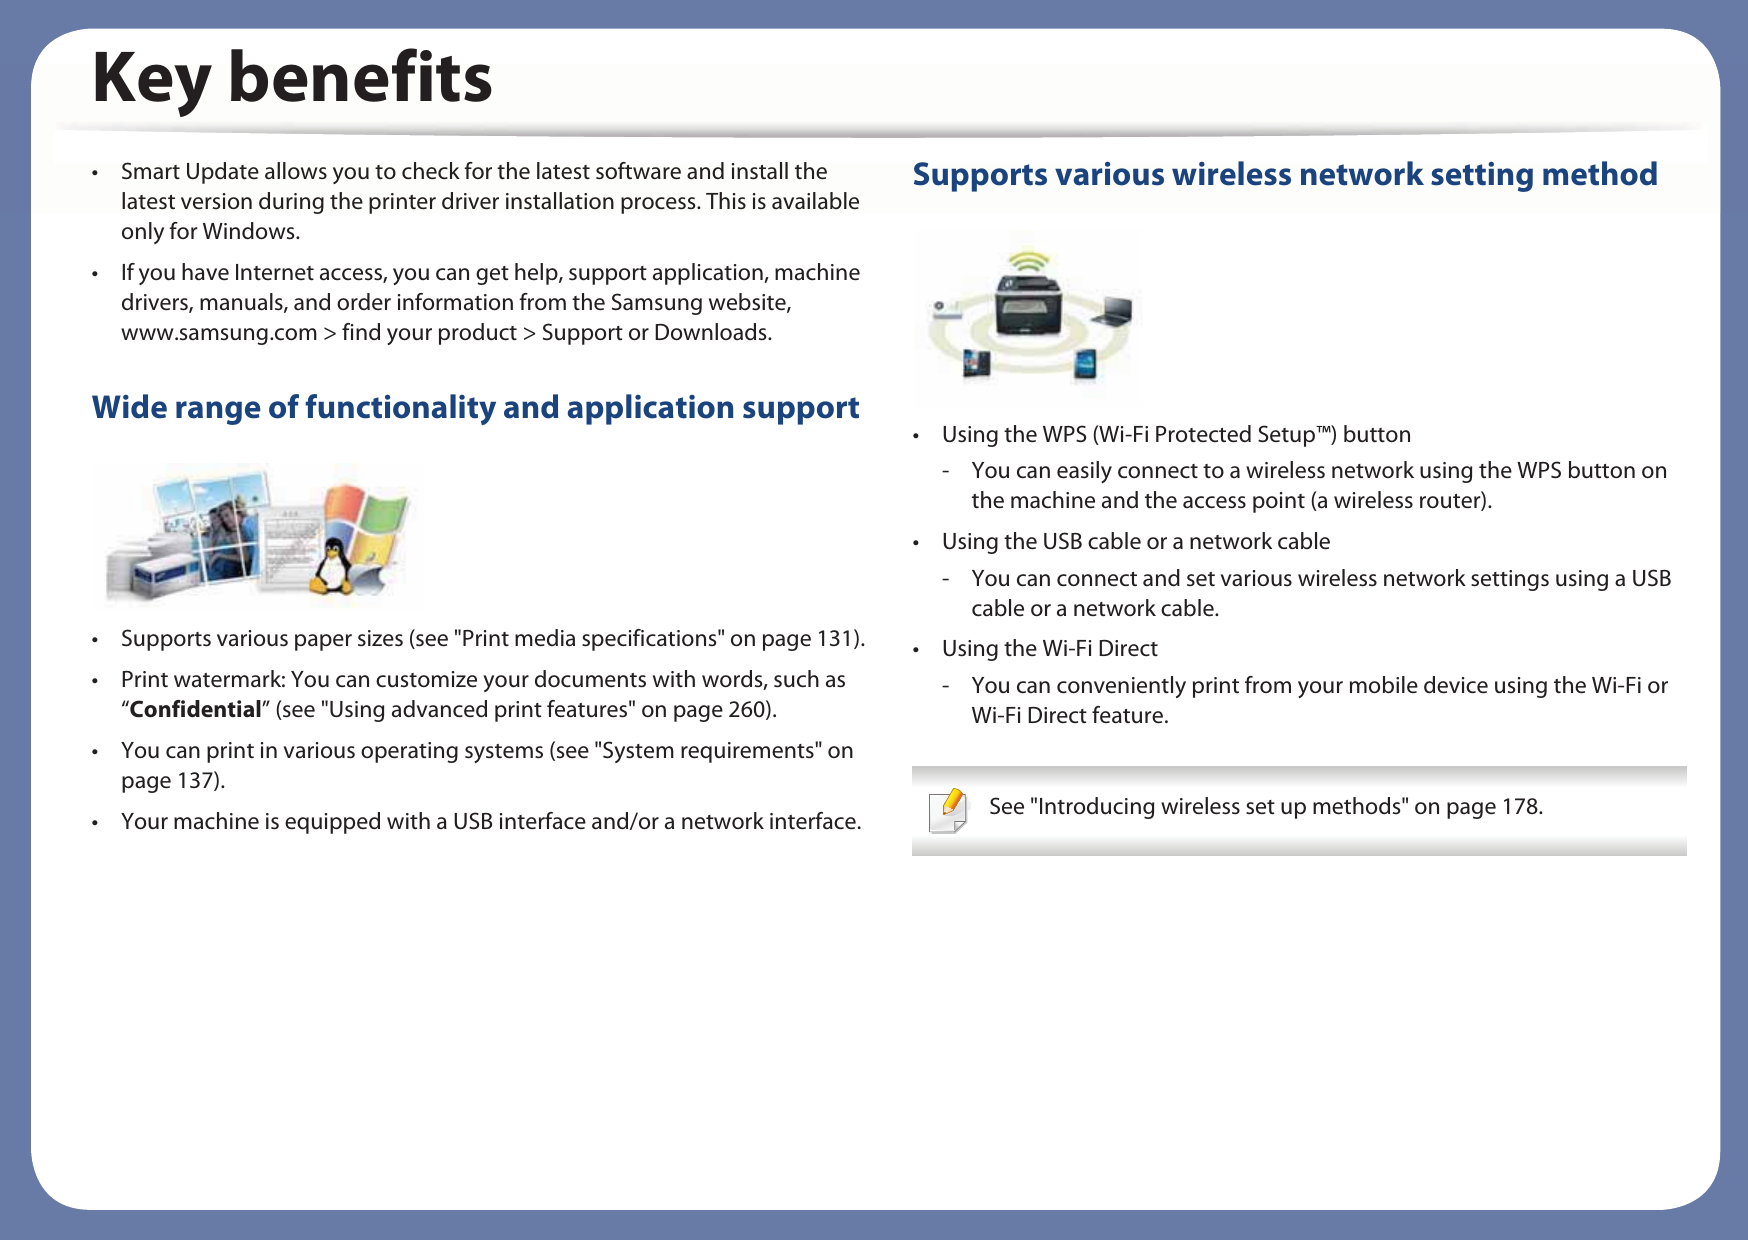 Key benefits• Smart Update allows you to check for the latest software and install the latest version during the printer driver installation process. This is available only for Windows.• If you have Internet access, you can get help, support application, machine drivers, manuals, and order information from the Samsung website, www.samsung.com &gt; find your product &gt; Support or Downloads.Wide range of functionality and application support• Supports various paper sizes (see &quot;Print media specifications&quot; on page 131).• Print watermark: You can customize your documents with words, such as “Confidential” (see &quot;Using advanced print features&quot; on page 260).• You can print in various operating systems (see &quot;System requirements&quot; on page 137).• Your machine is equipped with a USB interface and/or a network interface.Supports various wireless network setting method • Using the WPS (Wi-Fi Protected Setup™) button- You can easily connect to a wireless network using the WPS button on the machine and the access point (a wireless router).• Using the USB cable or a network cable- You can connect and set various wireless network settings using a USB cable or a network cable.• Using the Wi-Fi Direct- You can conveniently print from your mobile device using the Wi-Fi or Wi-Fi Direct feature. See &quot;Introducing wireless set up methods&quot; on page 178. 